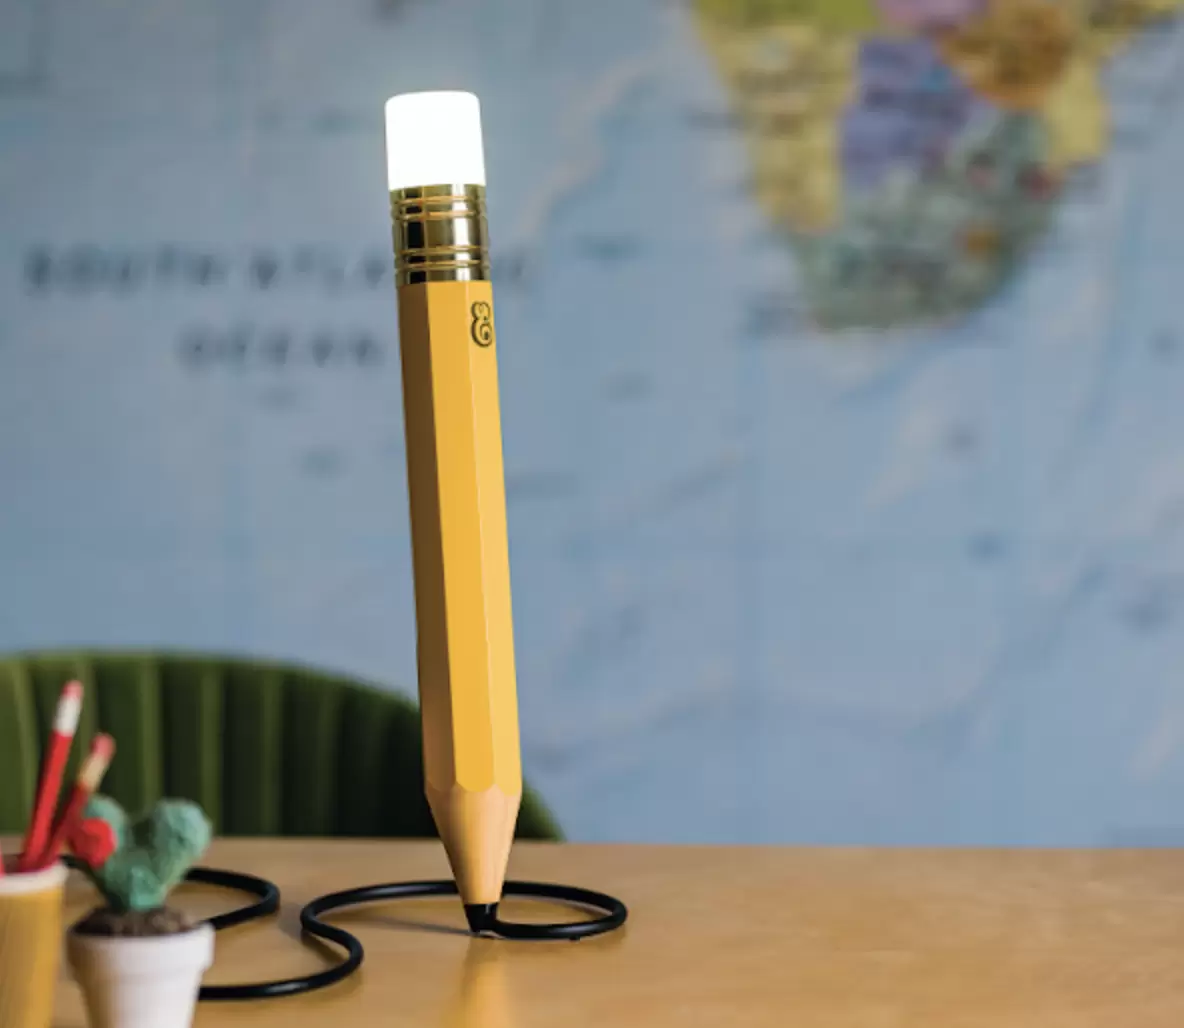 Pencil light seen on a desk with a map wallpaper behind.